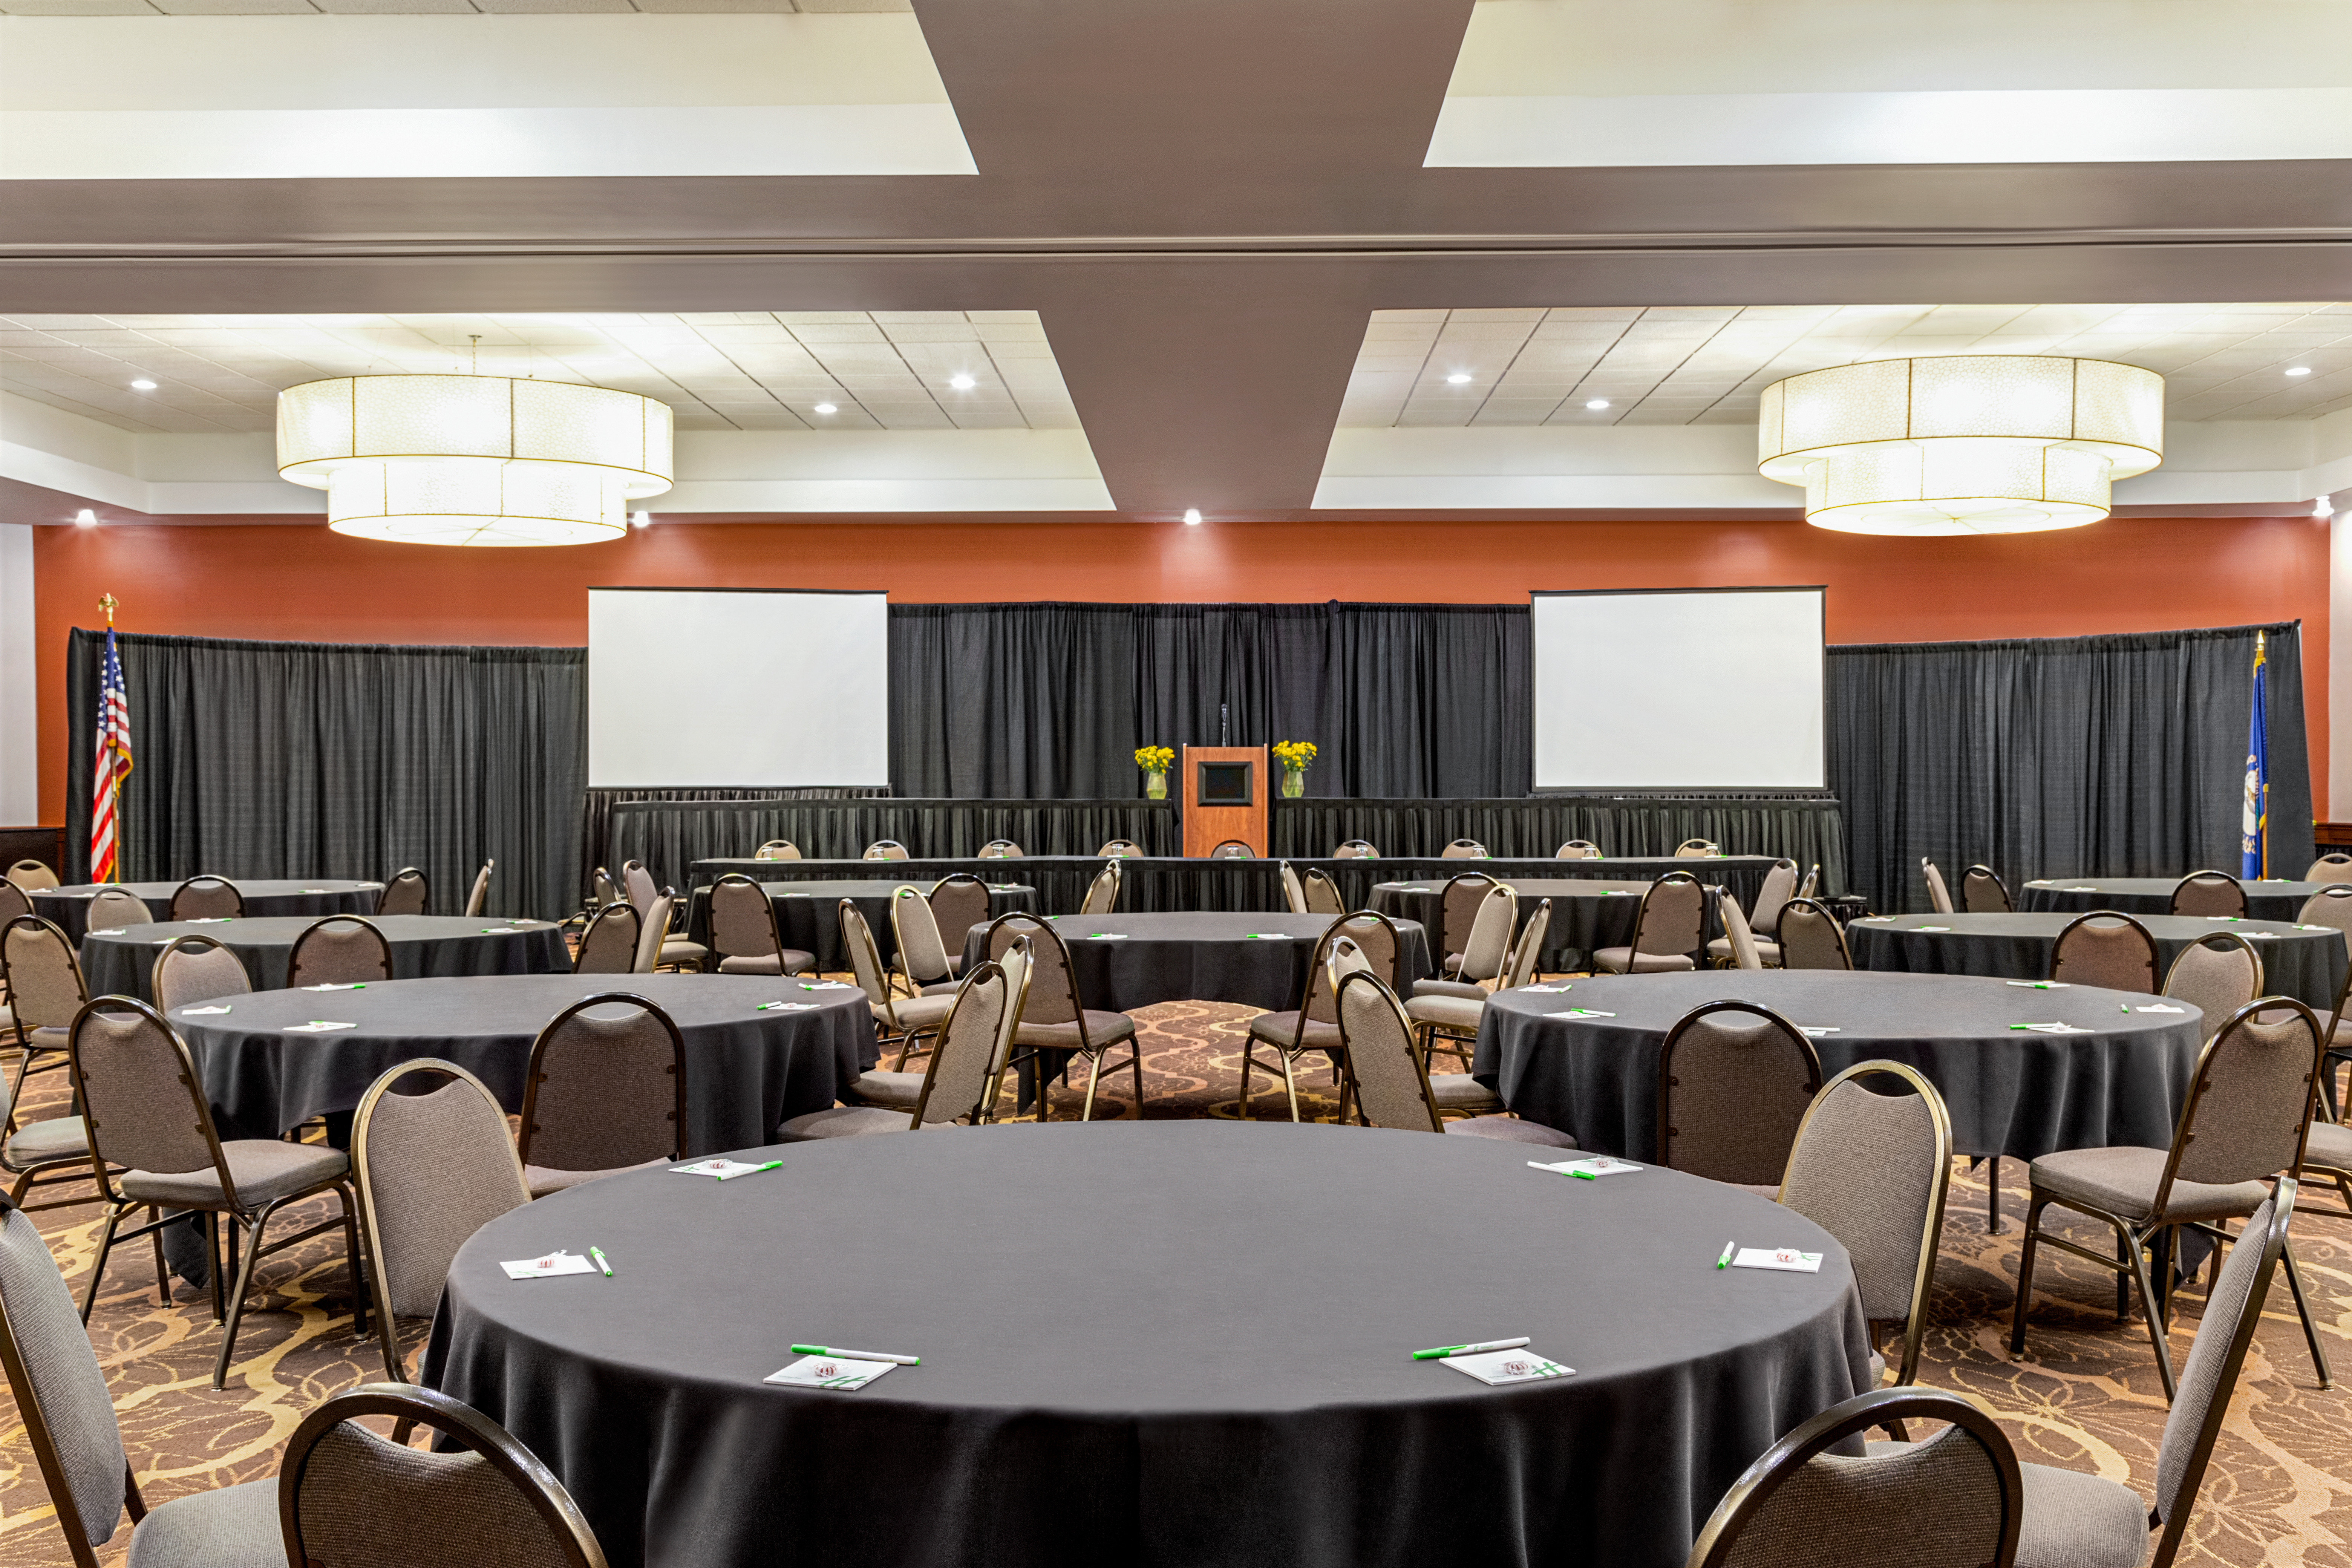 Perfect for any event that offers full conference facilities. 